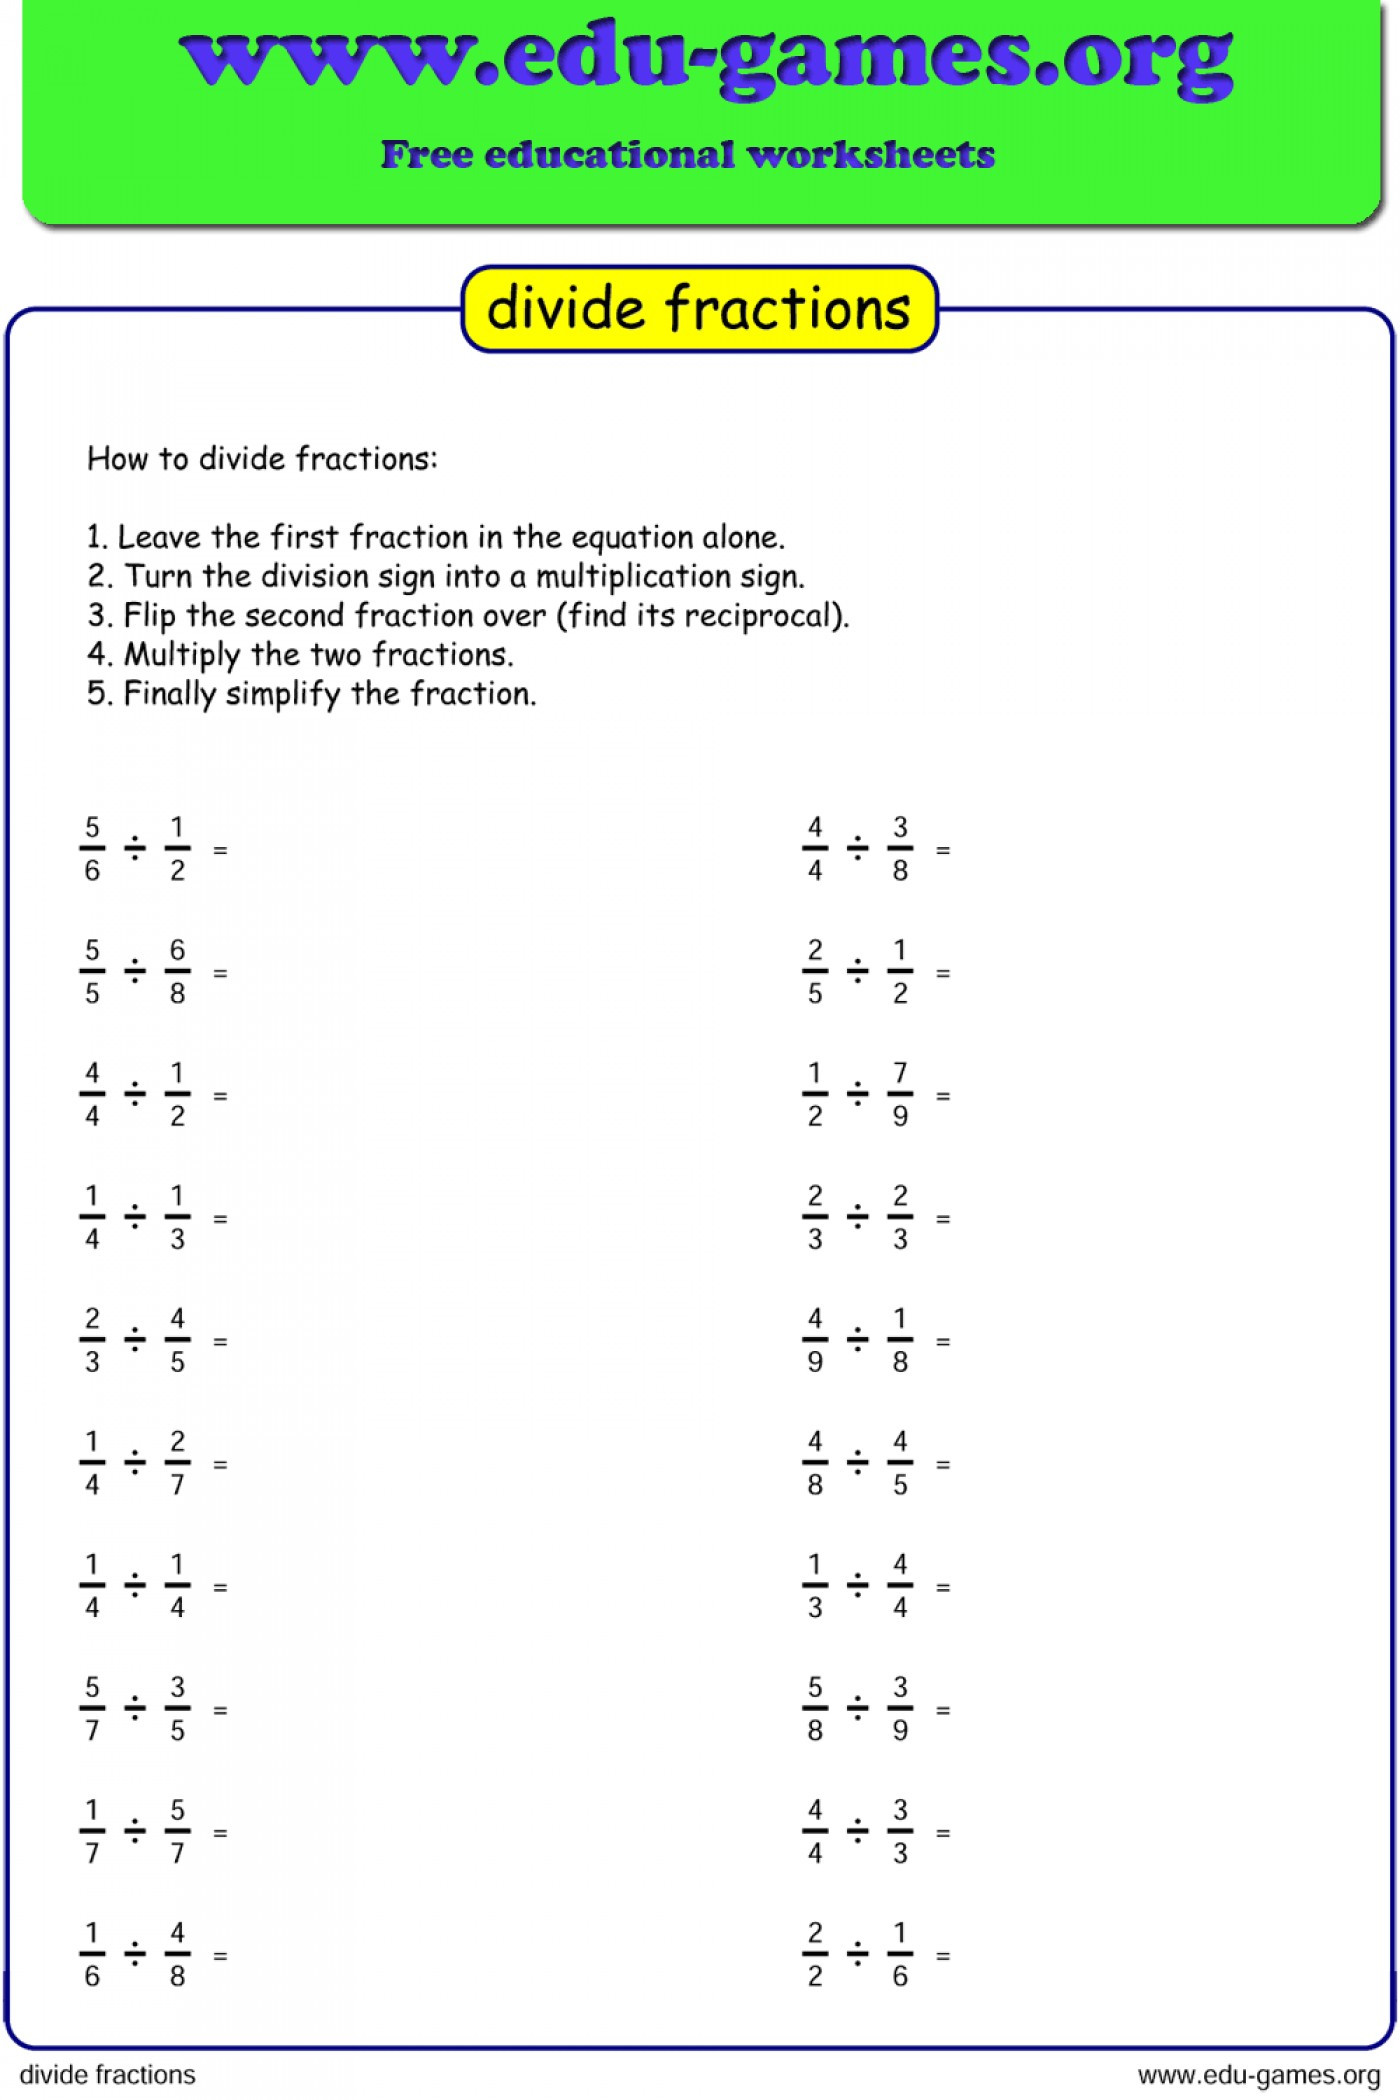 025 worksheet multiplying fractions word problems worksheets 5th grade mon core pdf lobo black multiply full size of division fraction printables doc pics free math 1400x2100